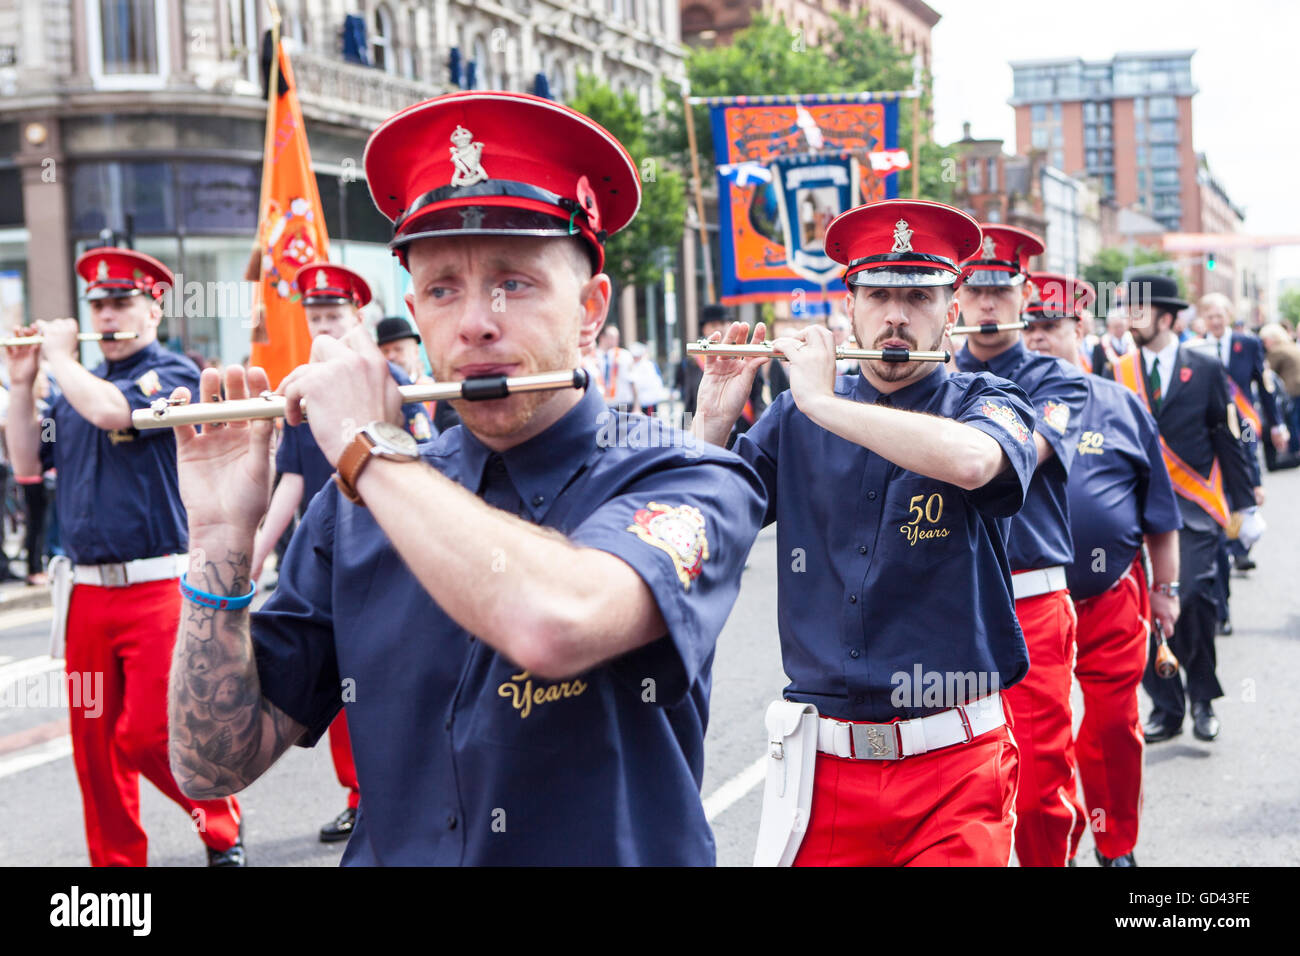 Belfast, UK. 12th July 2016. Orangemen celebrate the Twelfth. It originated during the late 18th century in Ulster. It celebrates the Glorious Revolution (1688) and victory of Protestant king William of Orange over Catholic king James II at the Battle of the Boyne (1690) Credit:  Bonzo/Alamy Live News Stock Photo